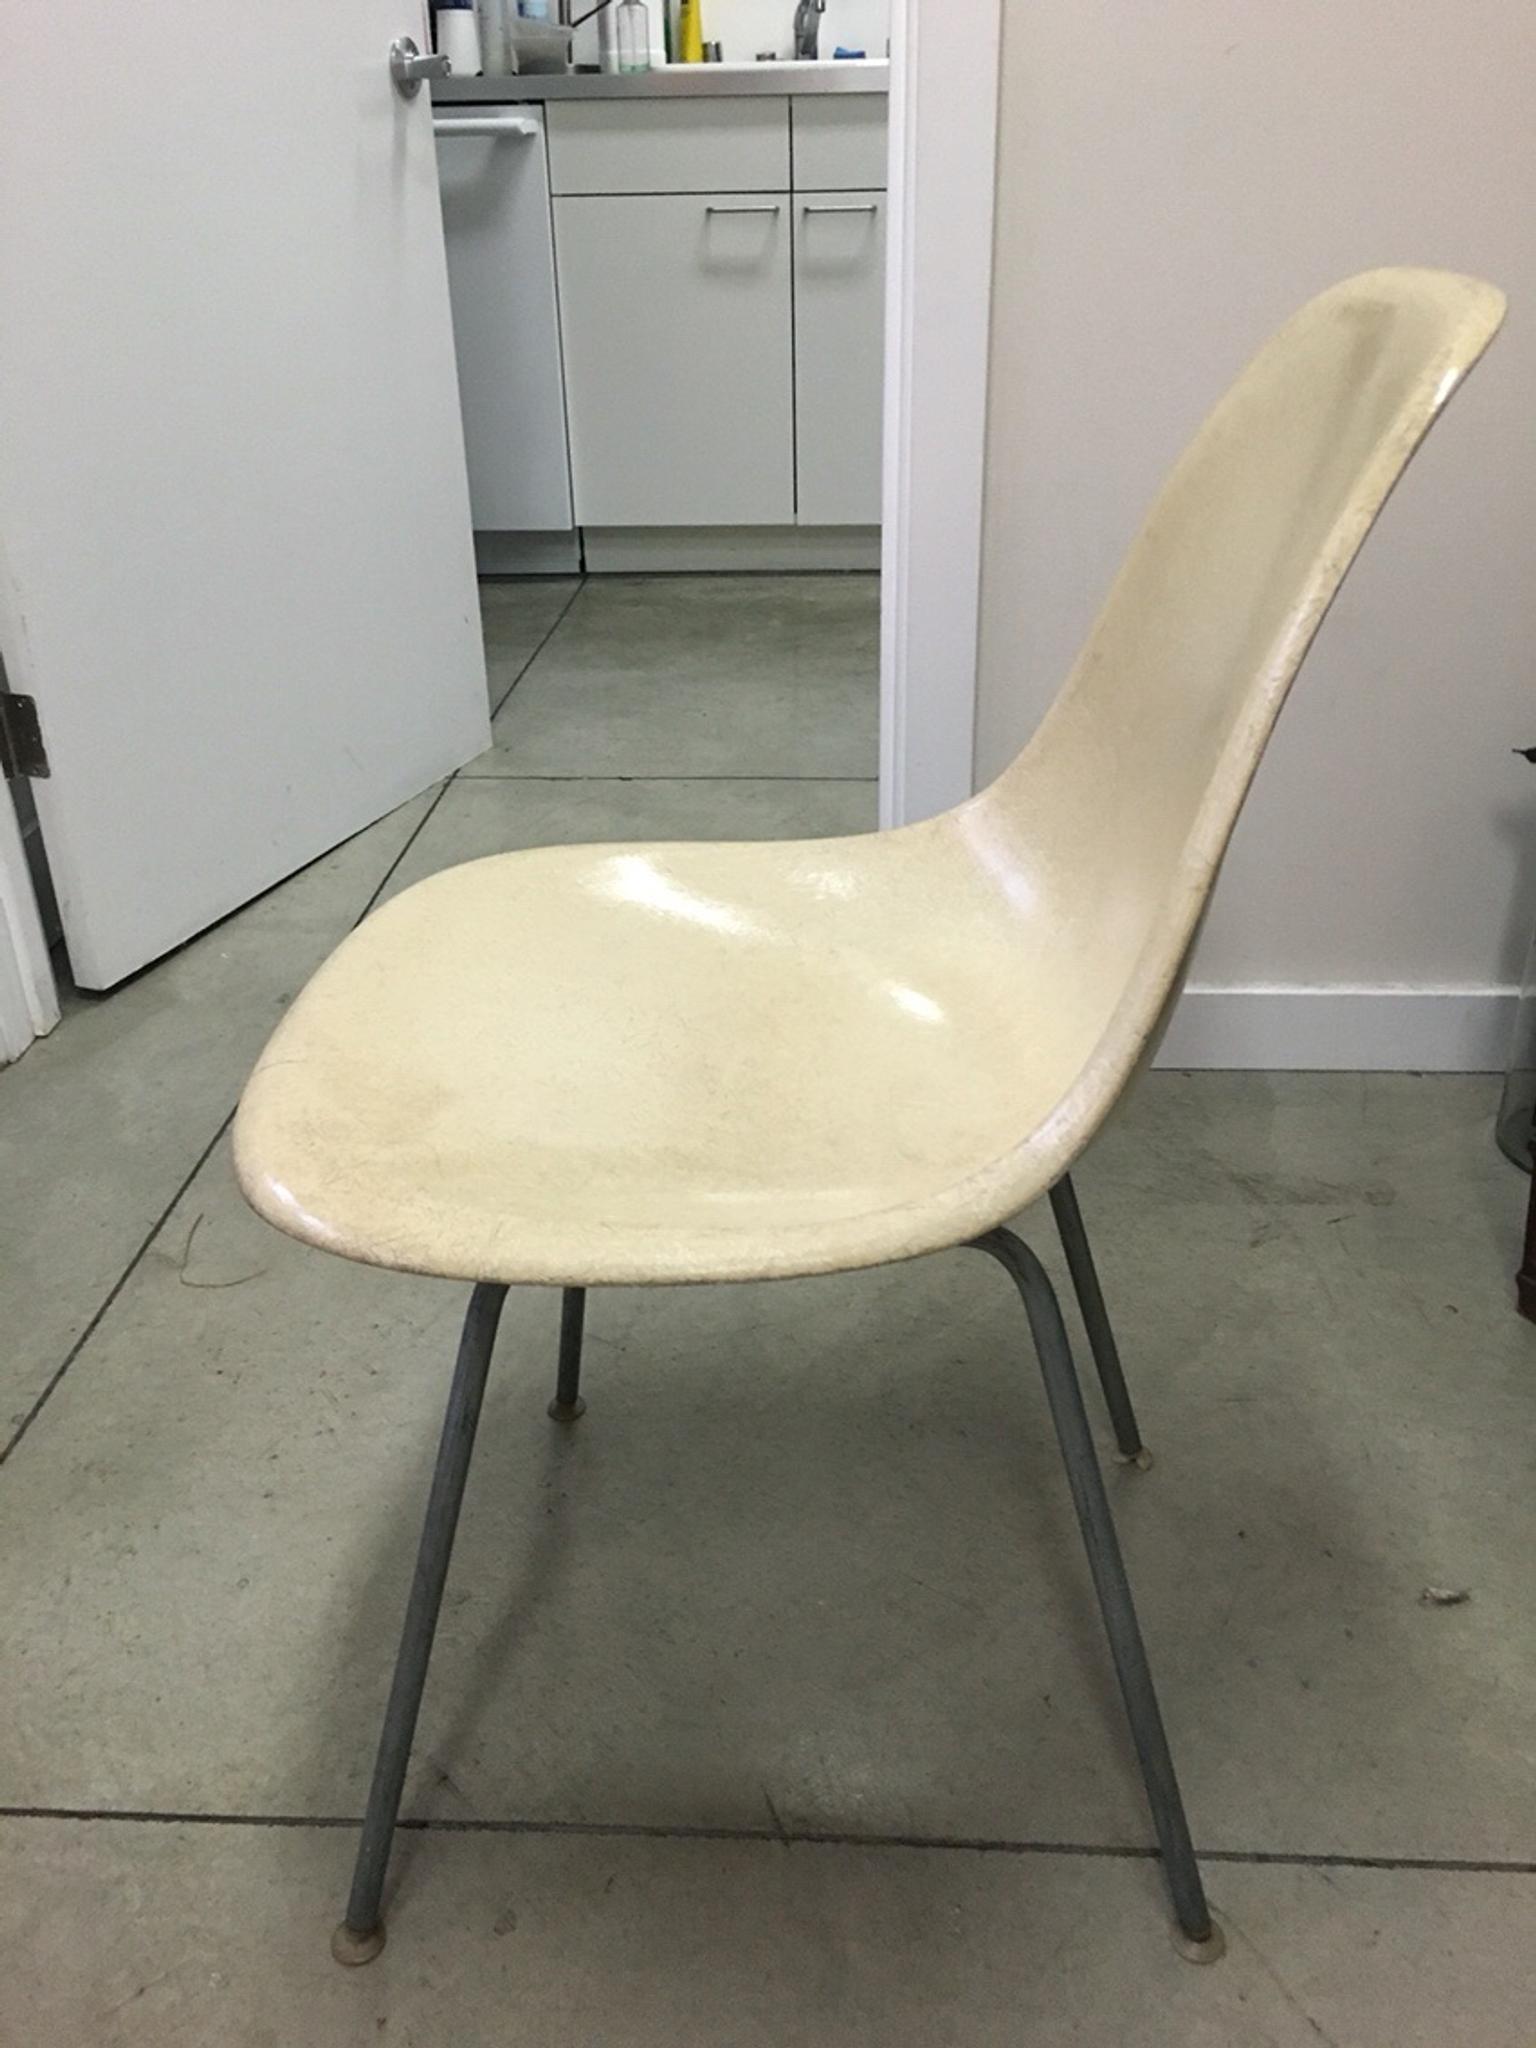 Herman Miller Table And Or Chairs In 91030 South Pasadena Fur